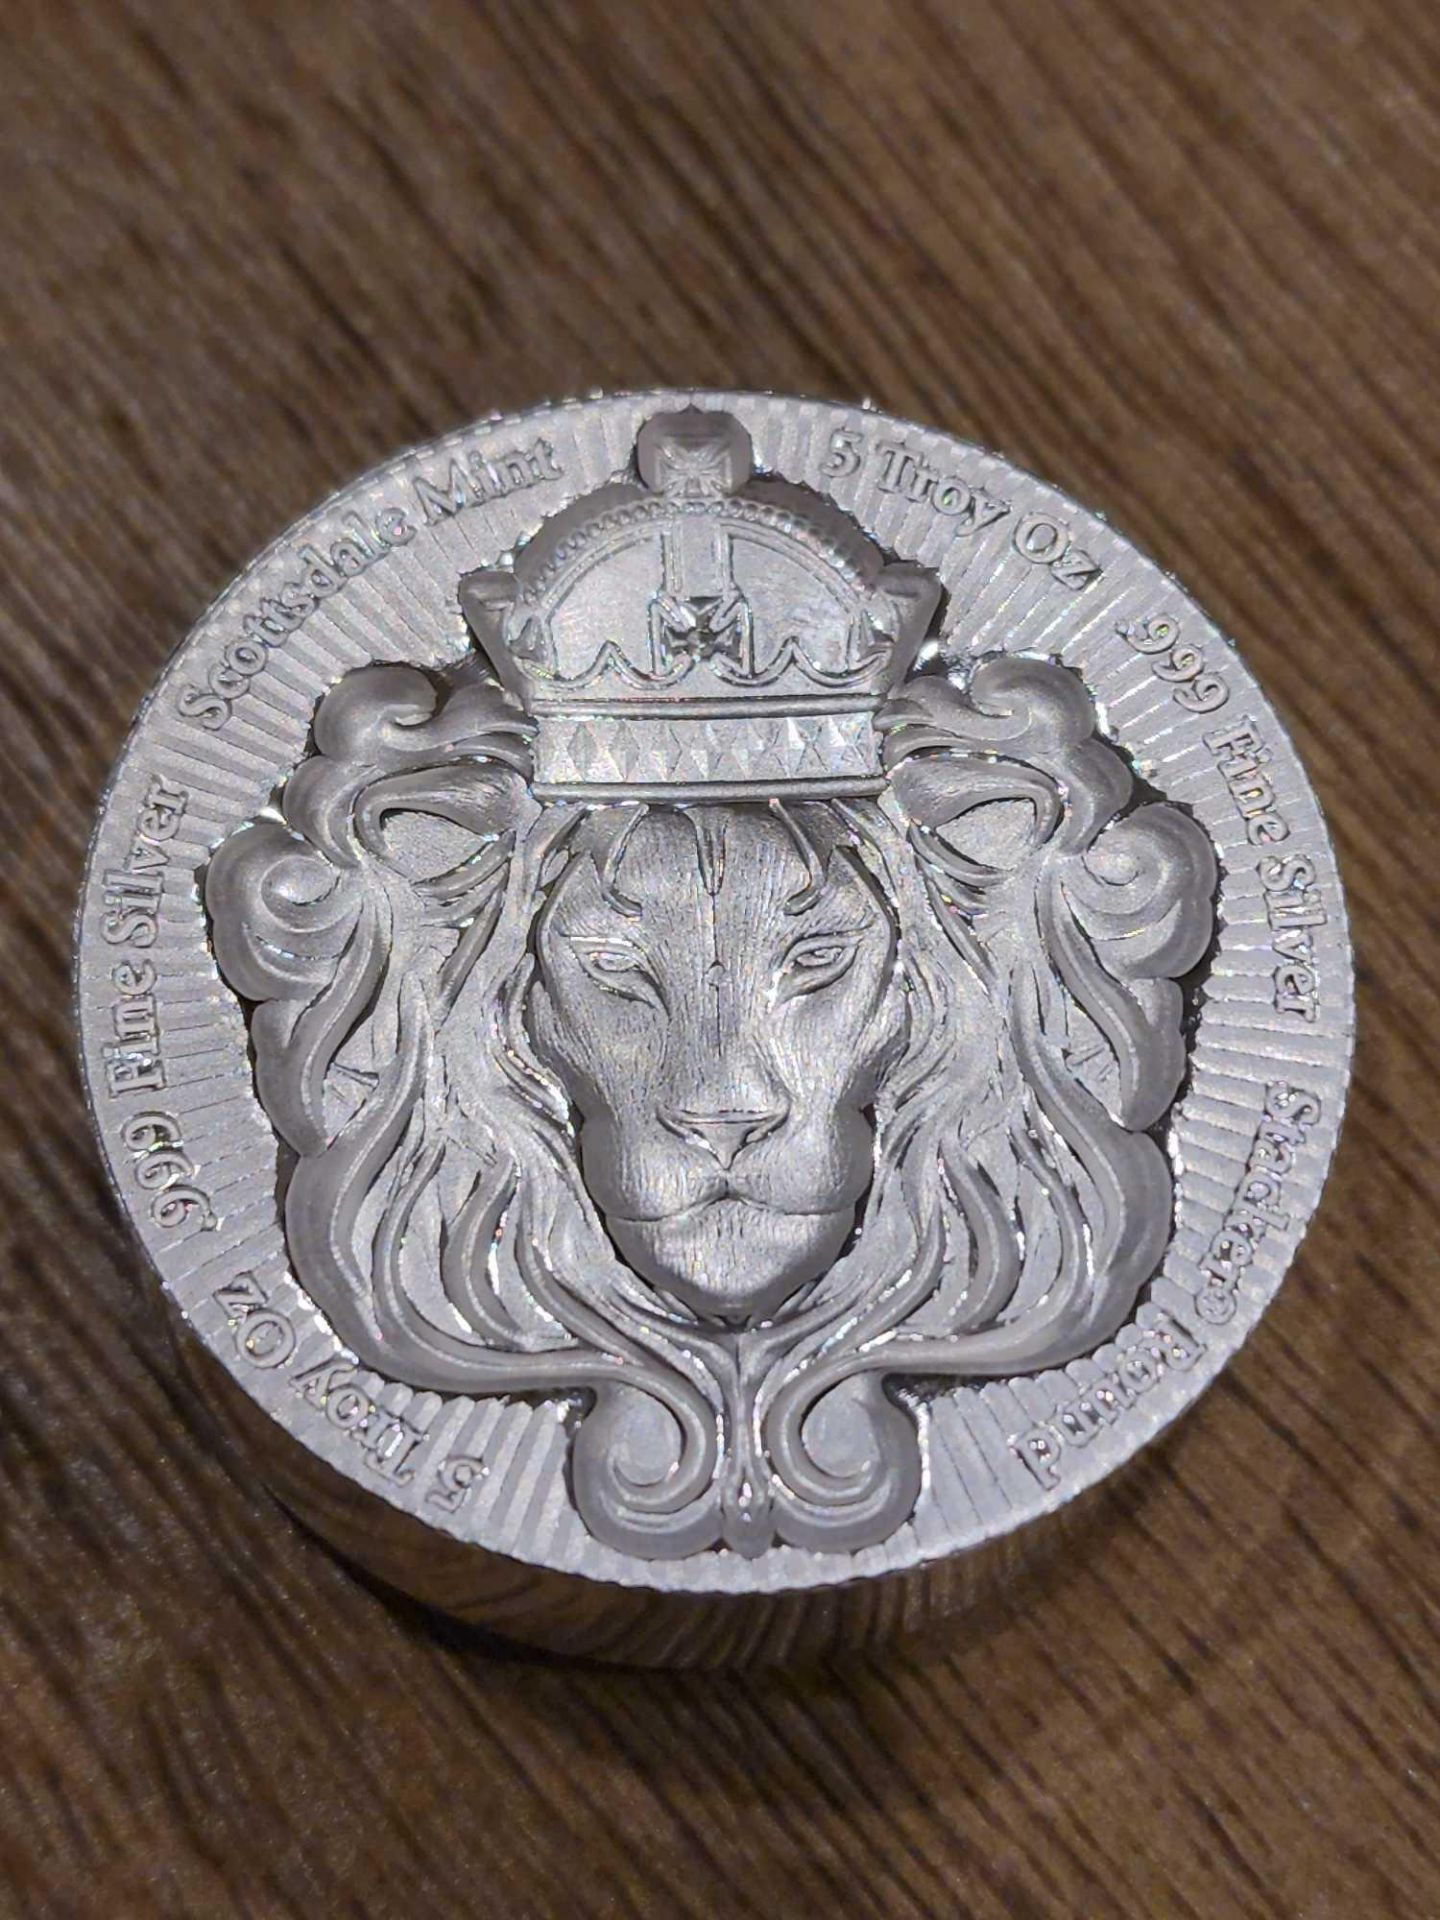 Scottsdale Stacker 5 oz Coin - Image 4 of 4